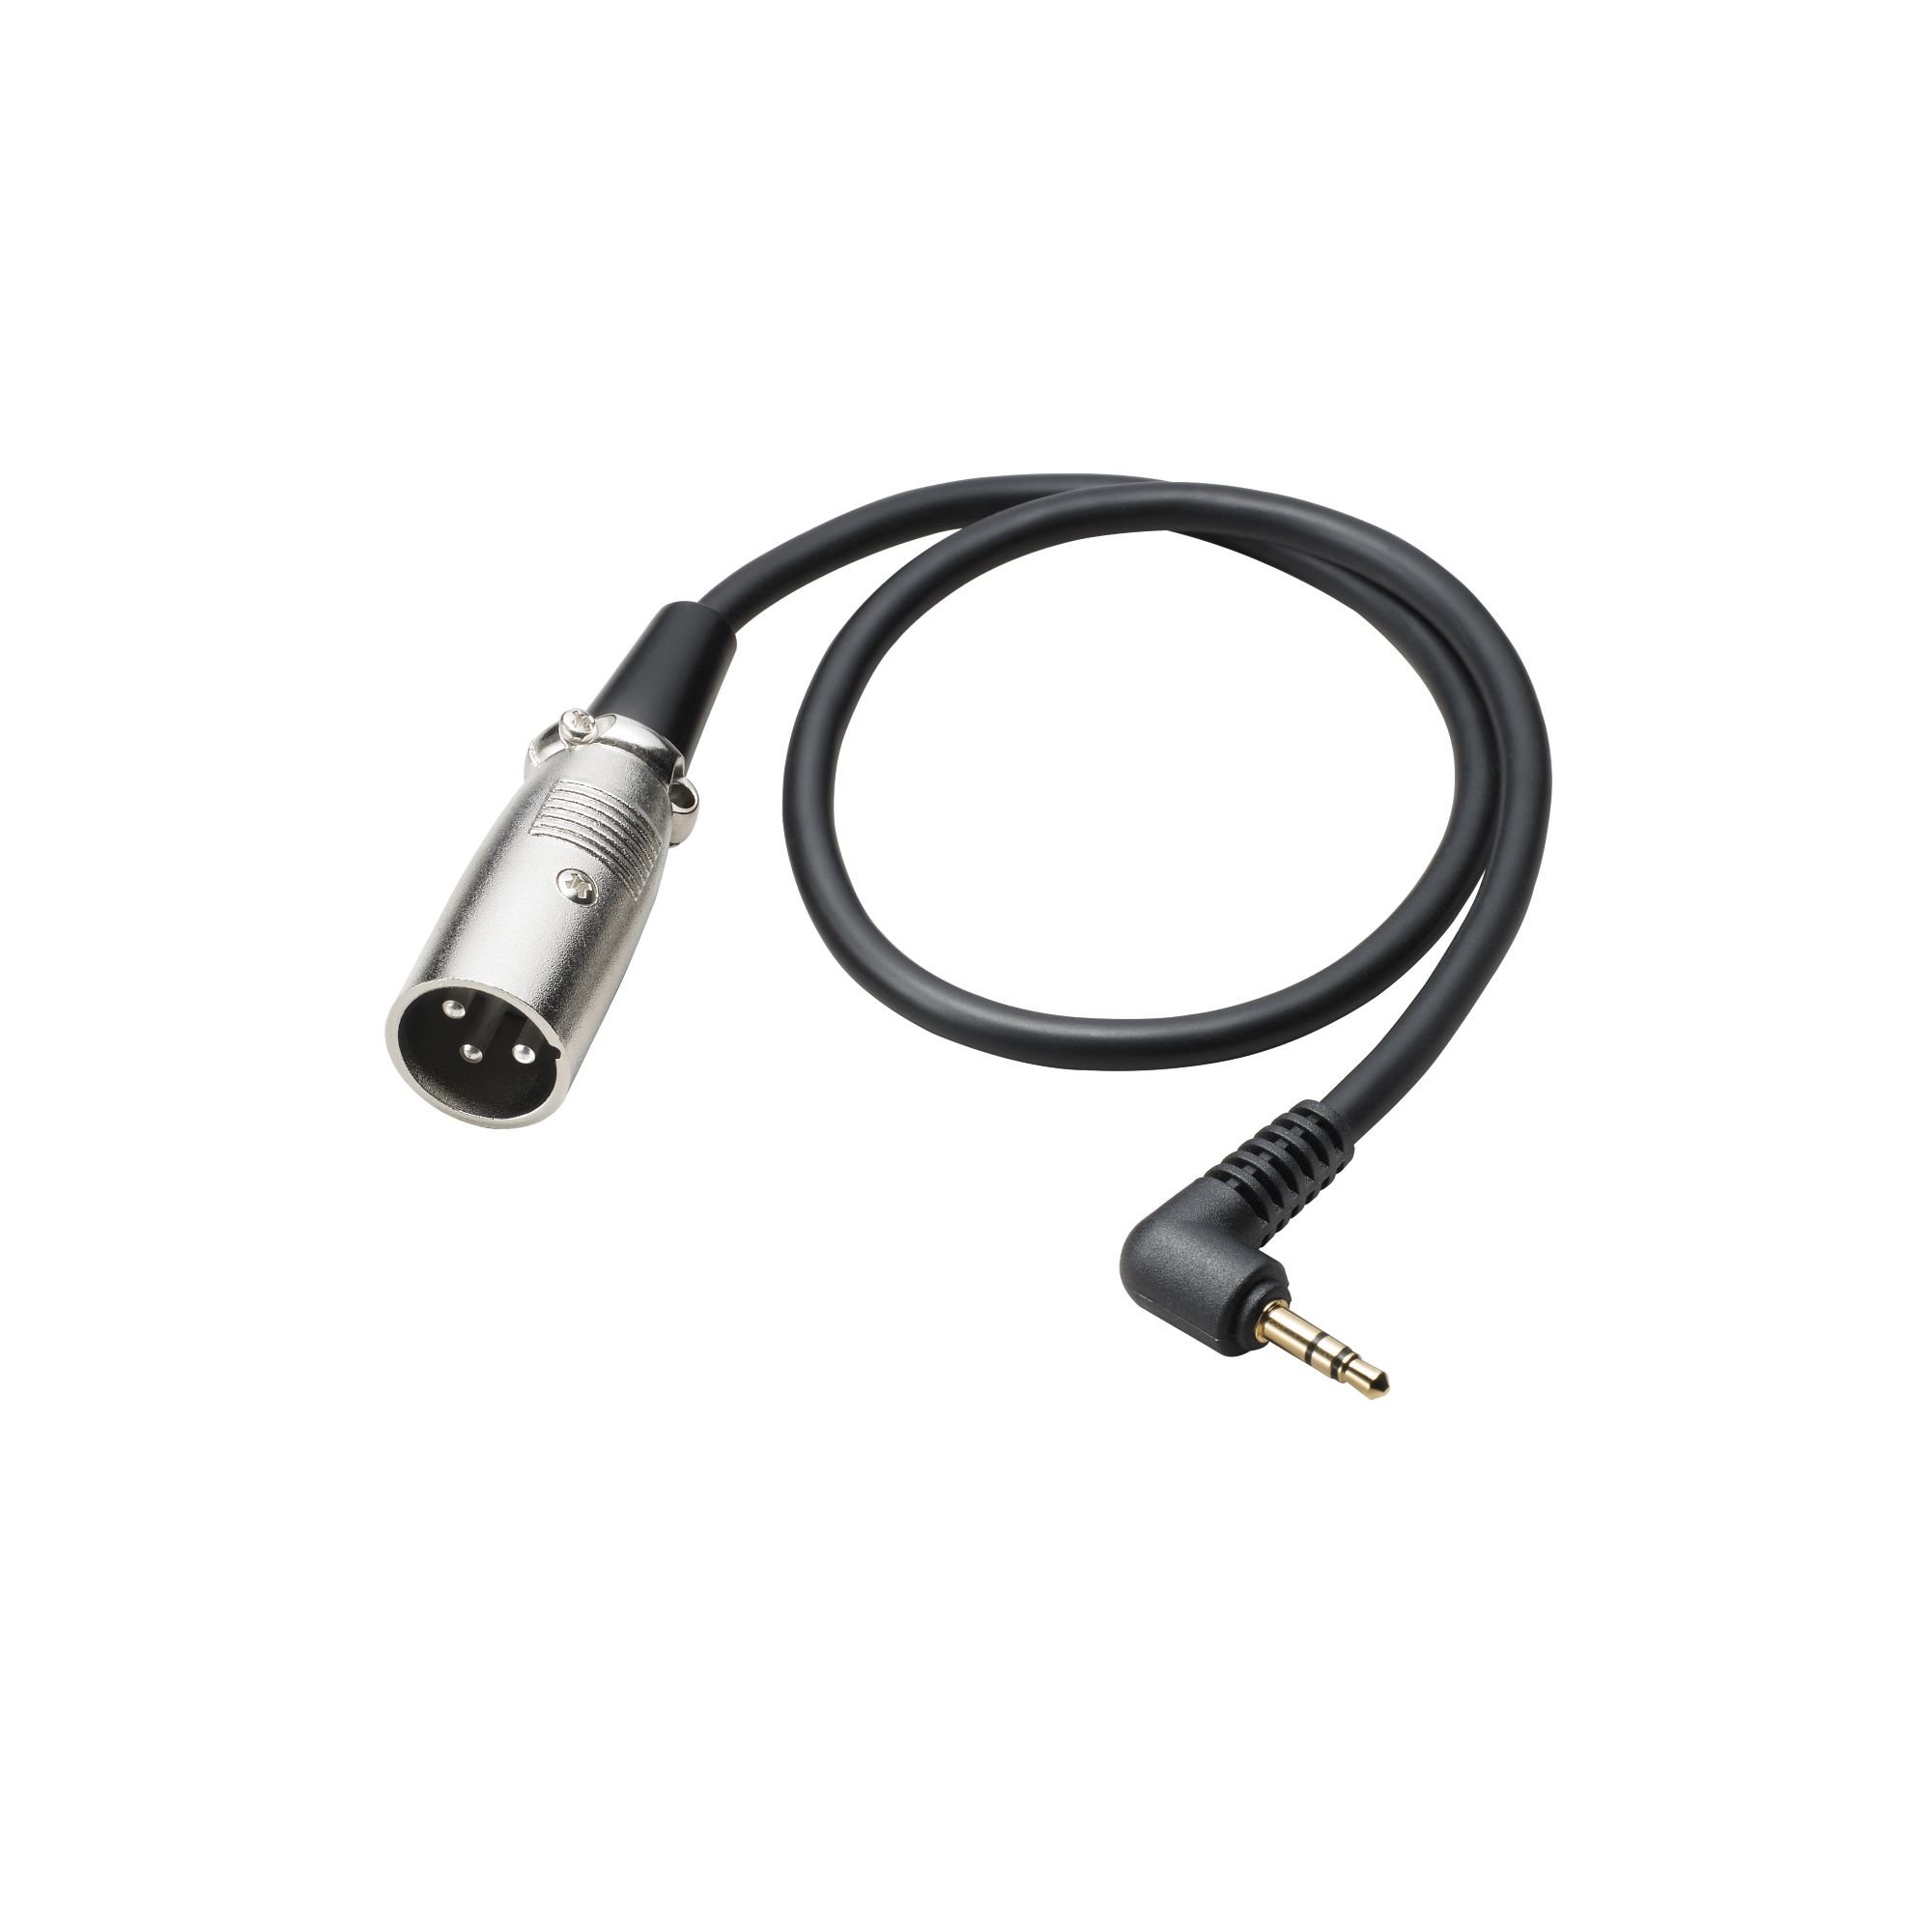 Photos - Cable (video, audio, USB) Audio-Technica AT8350 19.7 Audio Cable - 1/8 L-Type TRS Male to XLR Male P 